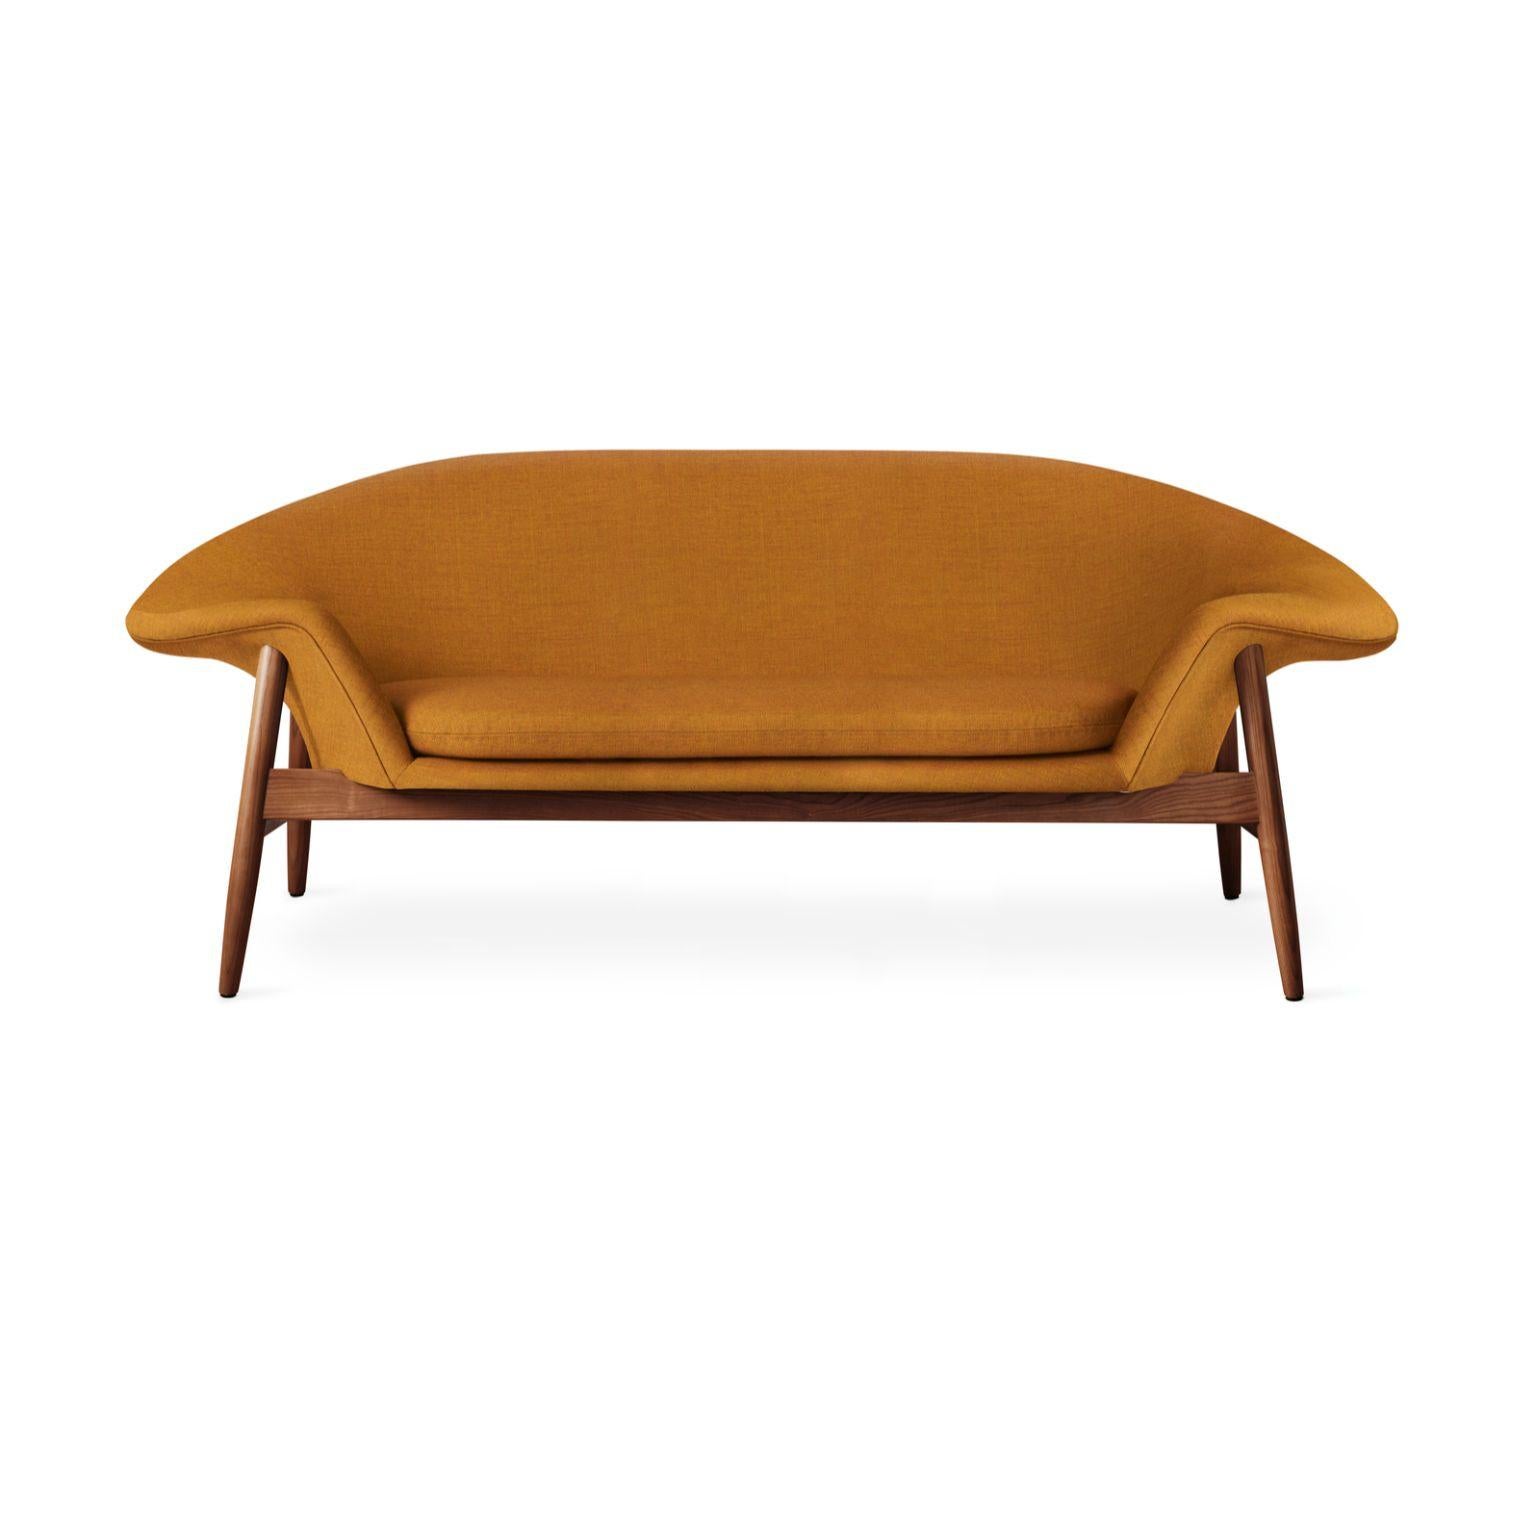 Fried egg sofa dark ochre by Warm Nordic
Dimensions: D 186 x W 68 x H 68 cm
Material: Textile upholstery, Solid oiled teak
Weight: 42 kg
Also available in different colours and finishes.

Warm Nordic is an ambitious design brand anchored in